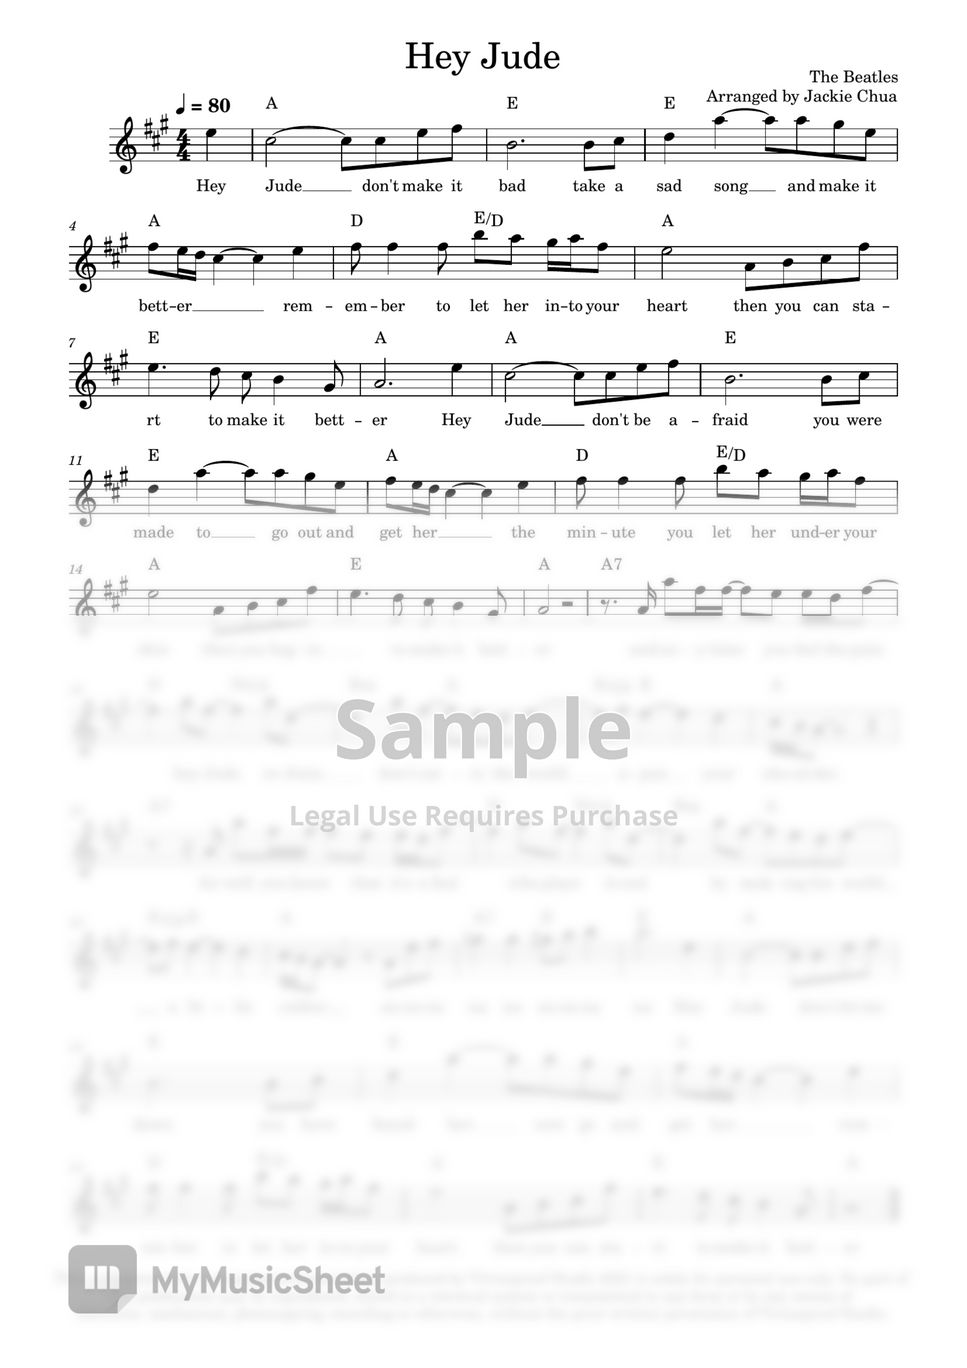 The Beatles - Hey Jude | Violin Solo with Chords or Lead Sheet (Violin Solo) by Jackie Chua